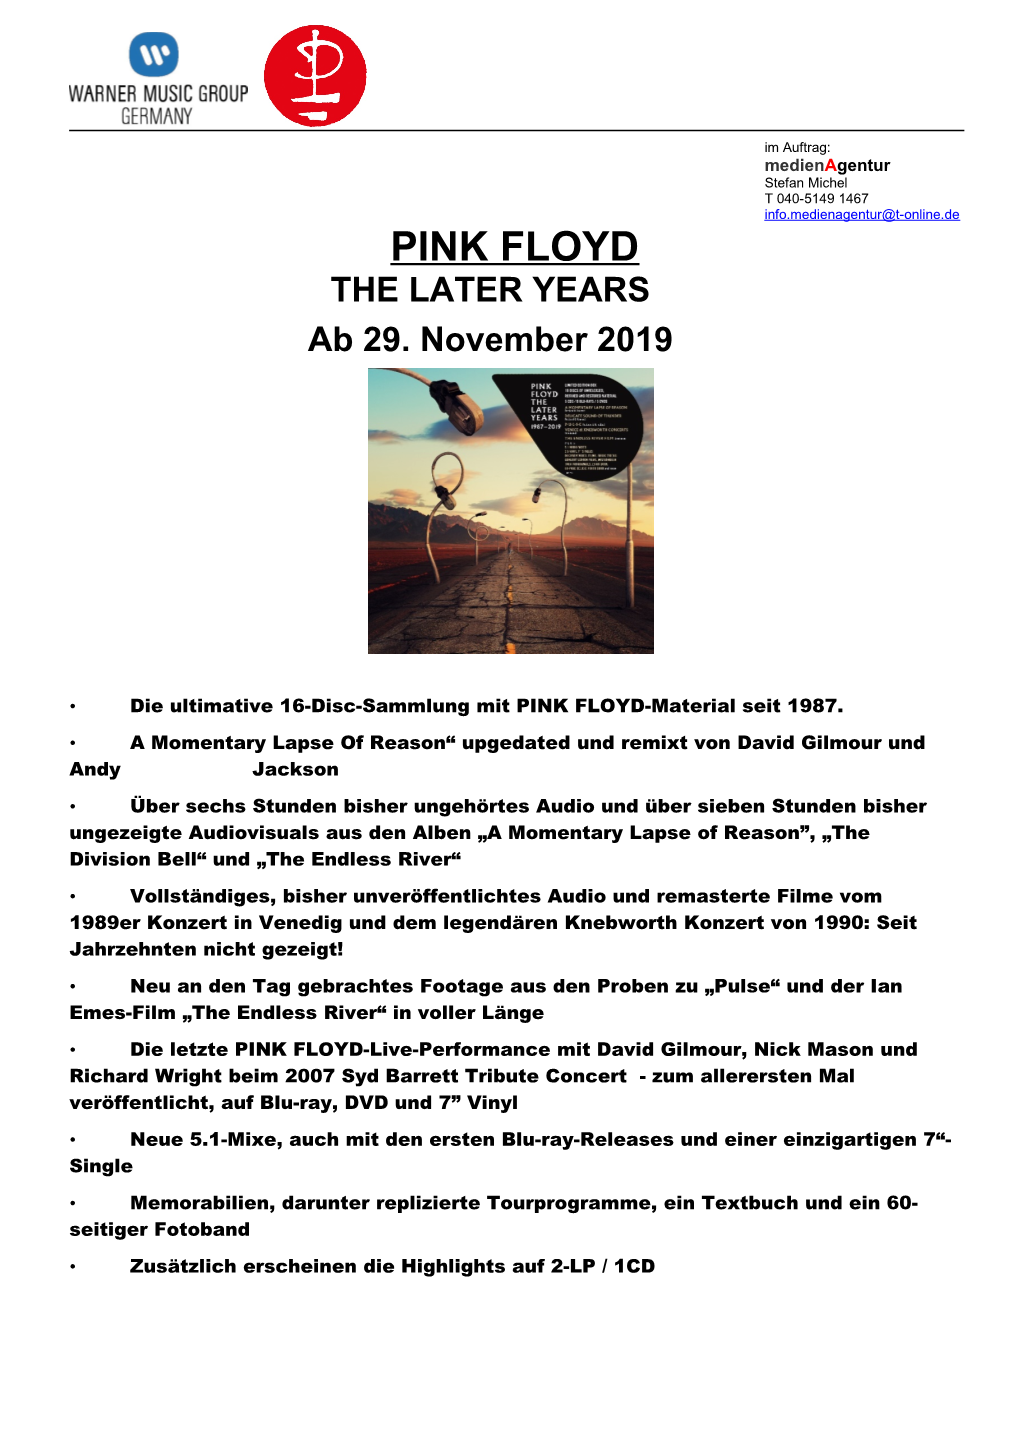 PINK FLOYD the LATER YEARS Ab 29